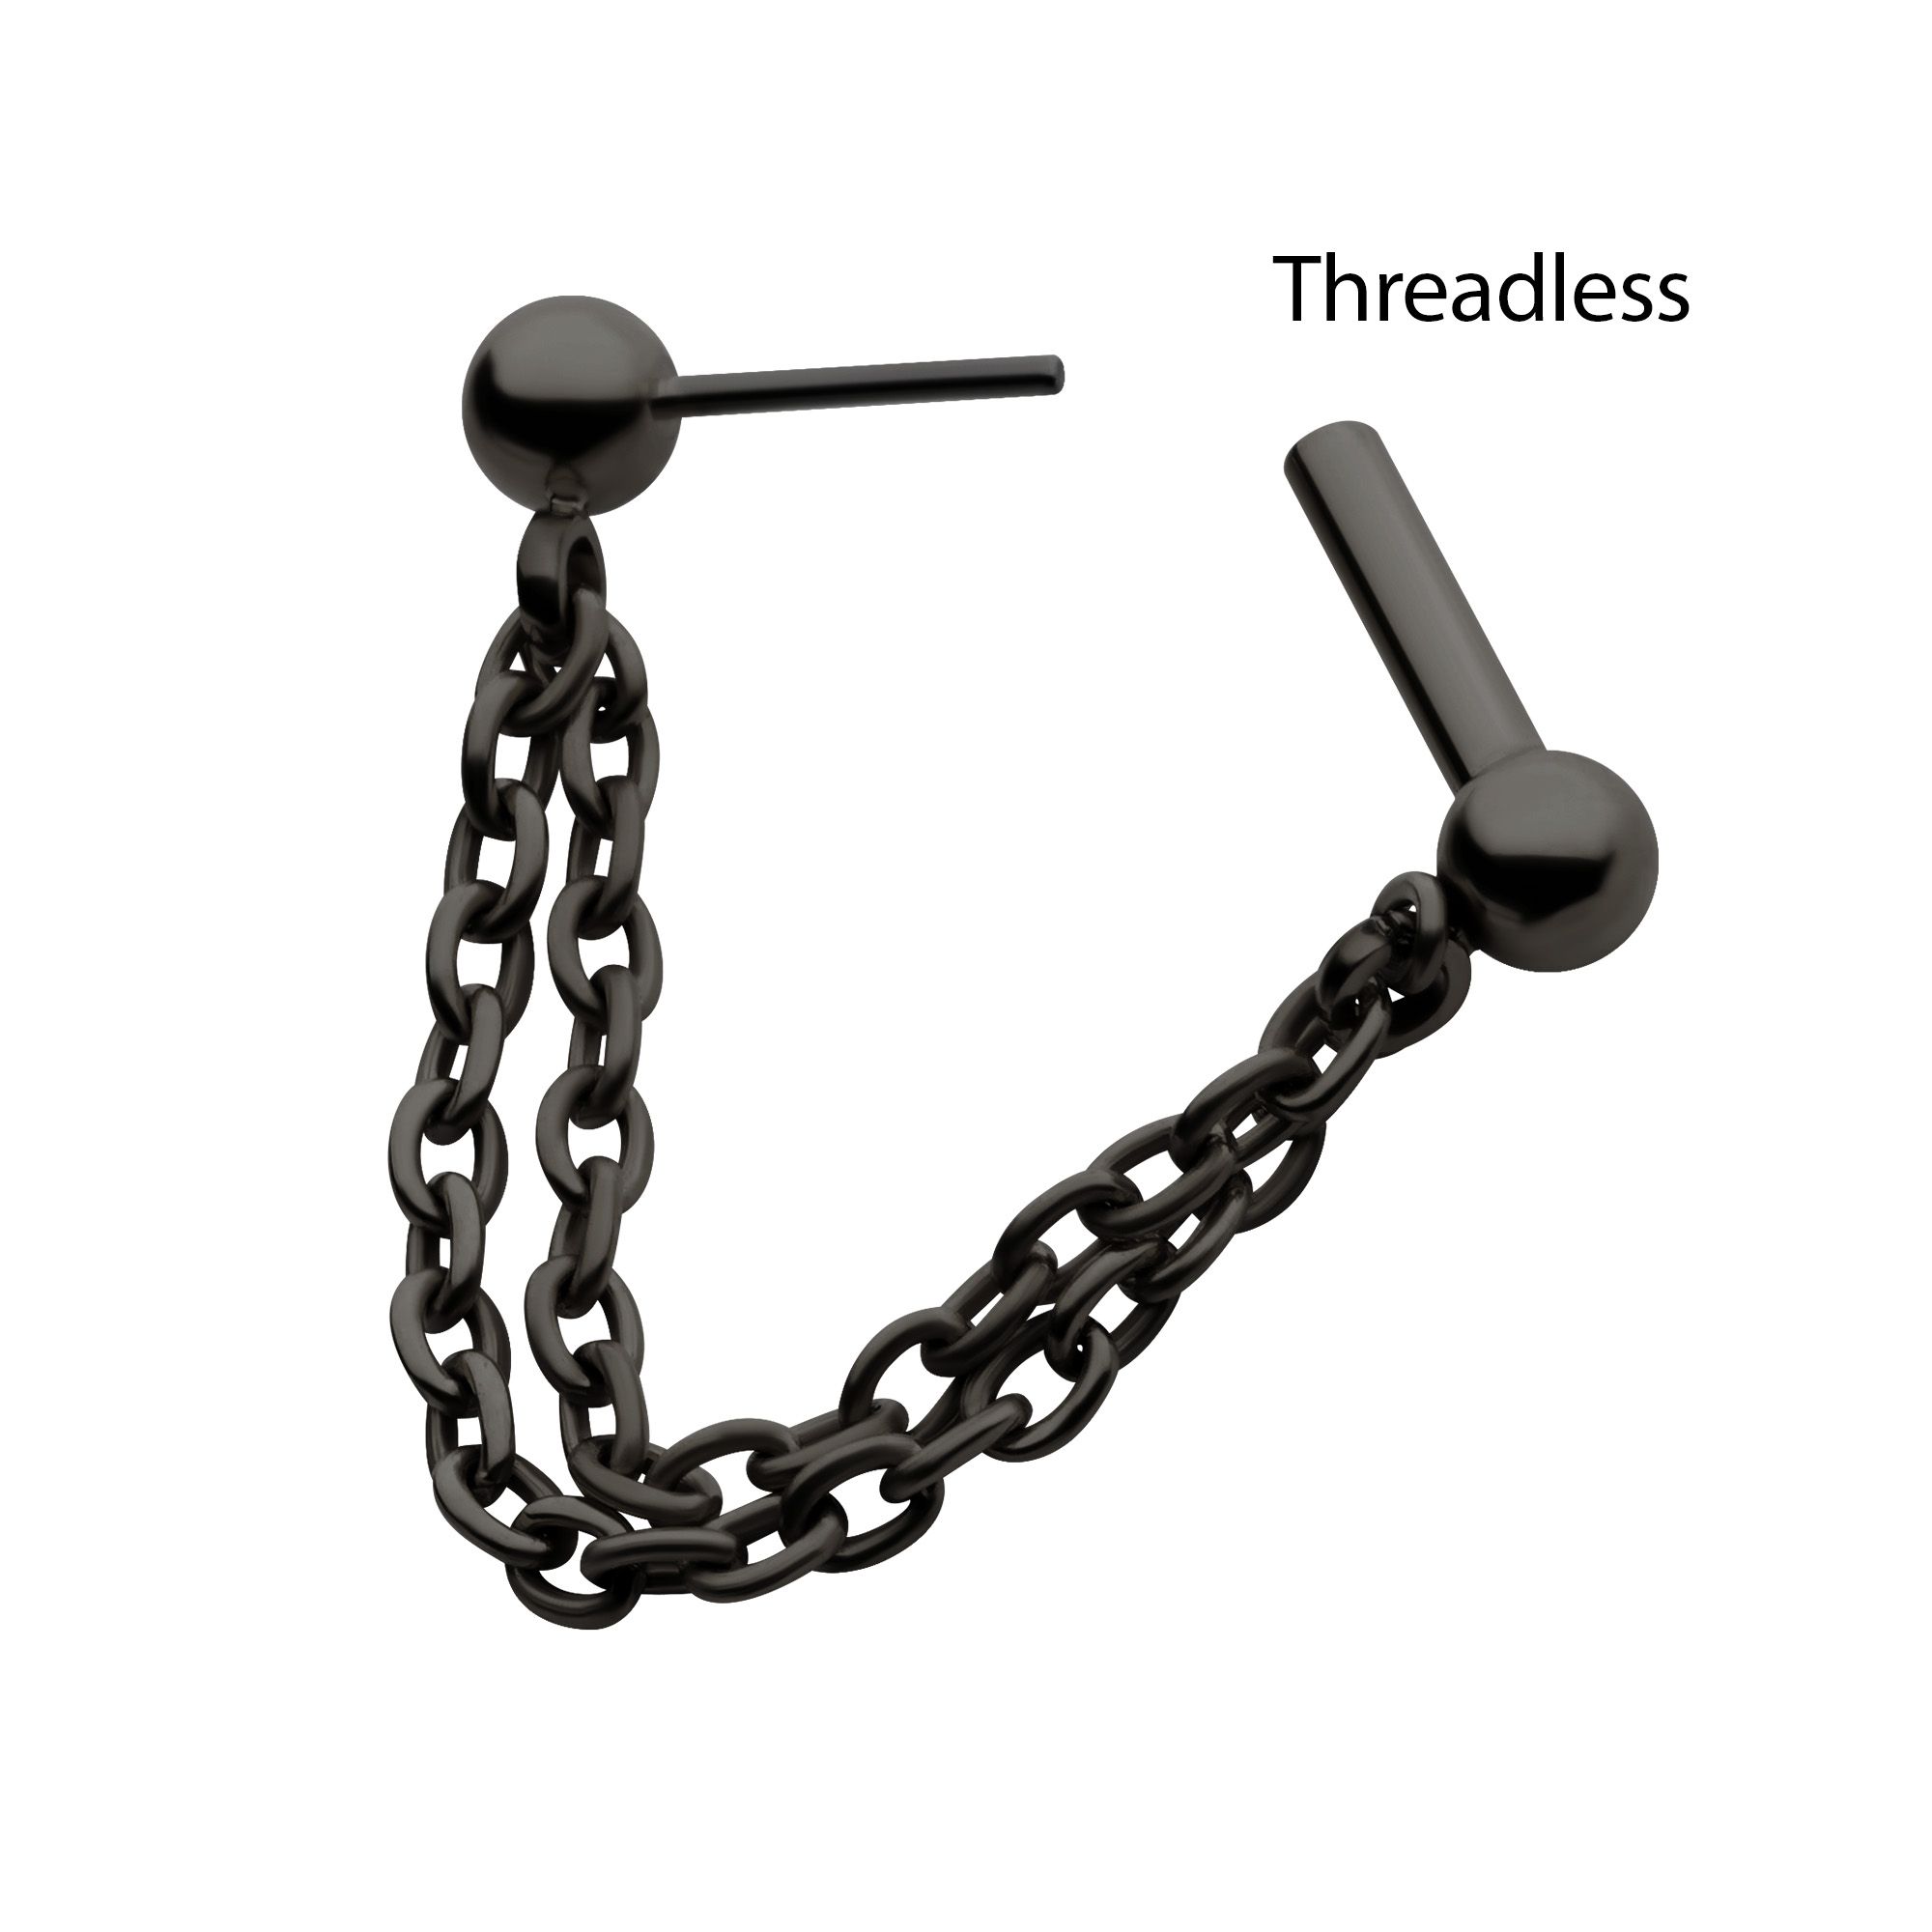 Black PVD Titanium 2 Tier Chains a One Side Threadless, One Side Fixed Bar Ball ends -Rebel Bod-RebelBod